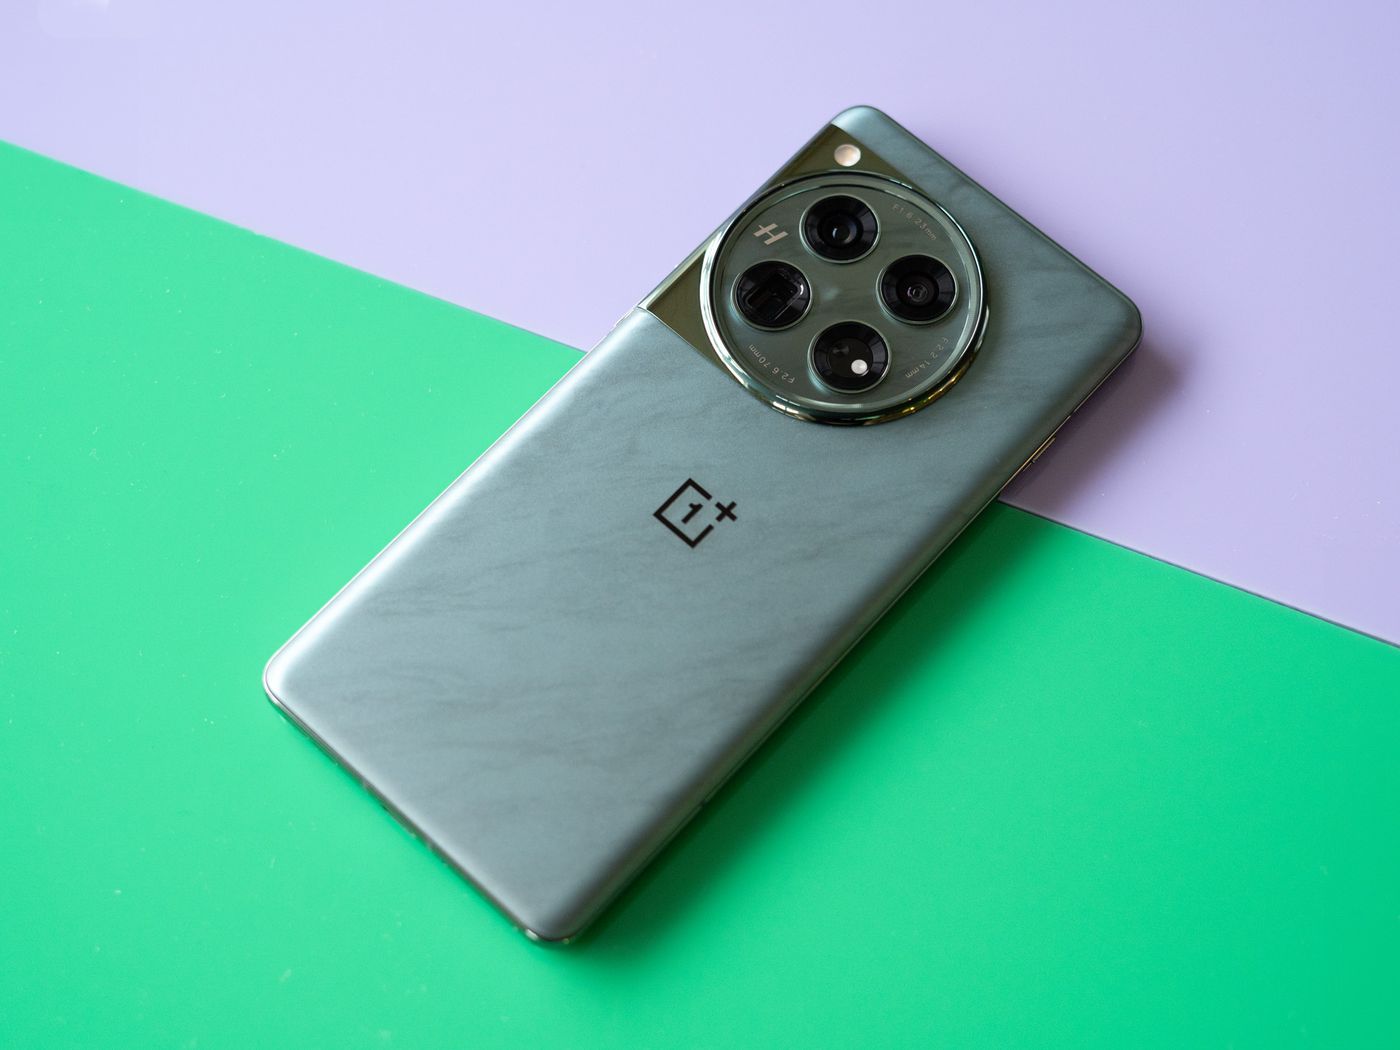 The Ultimate OnePlus 12 Review: Is It Worth the Hype? - OnePlus 12 software interface and enhancements